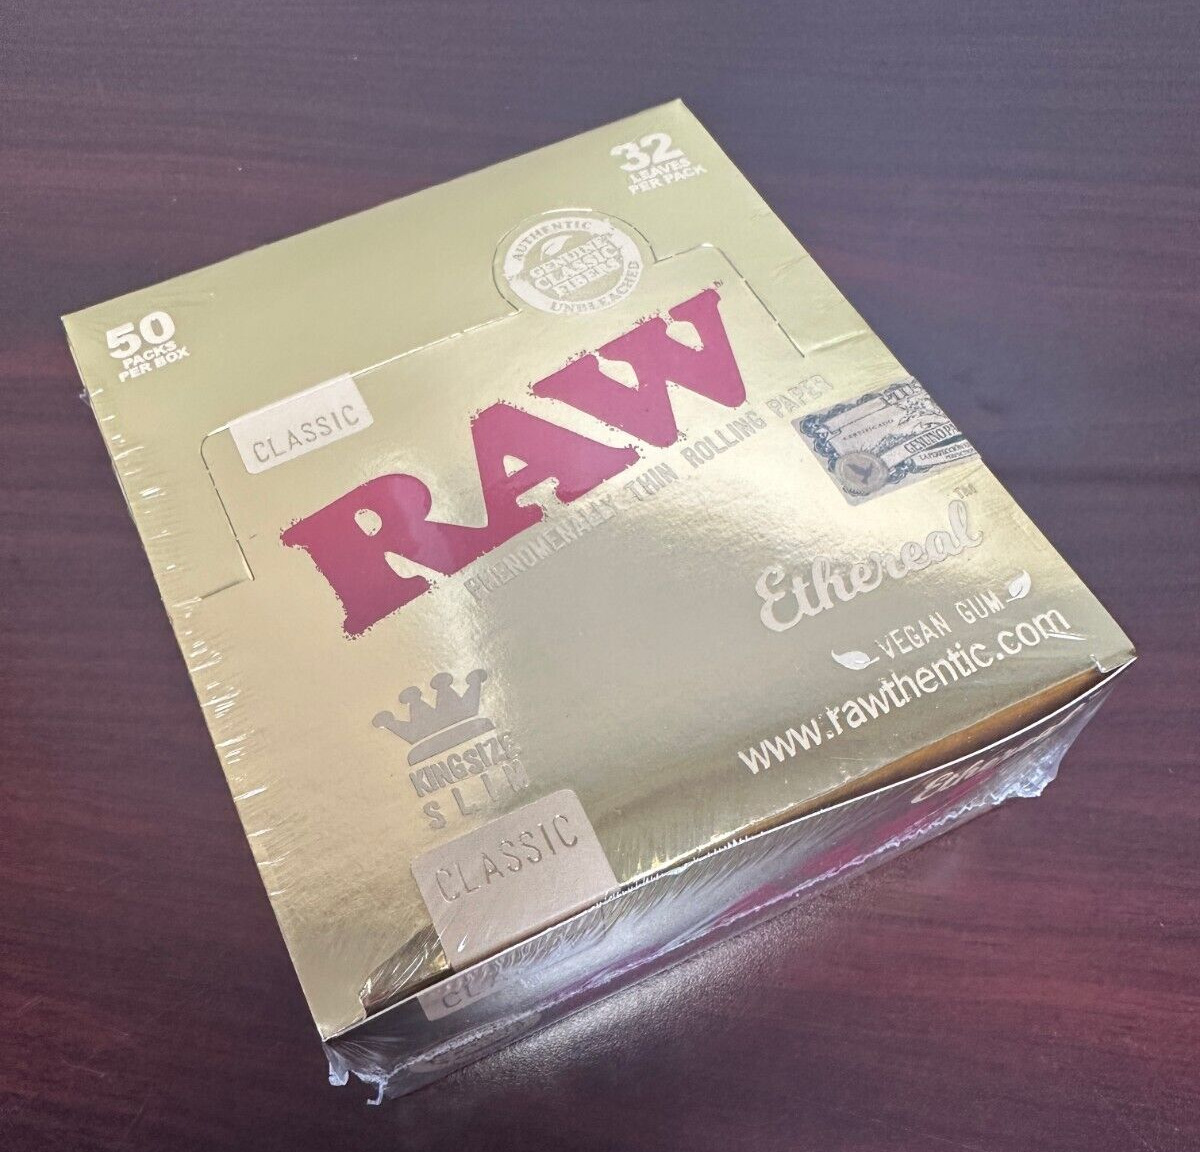 RAW Classic Ethereal King Size Slim Full Box ~50ct